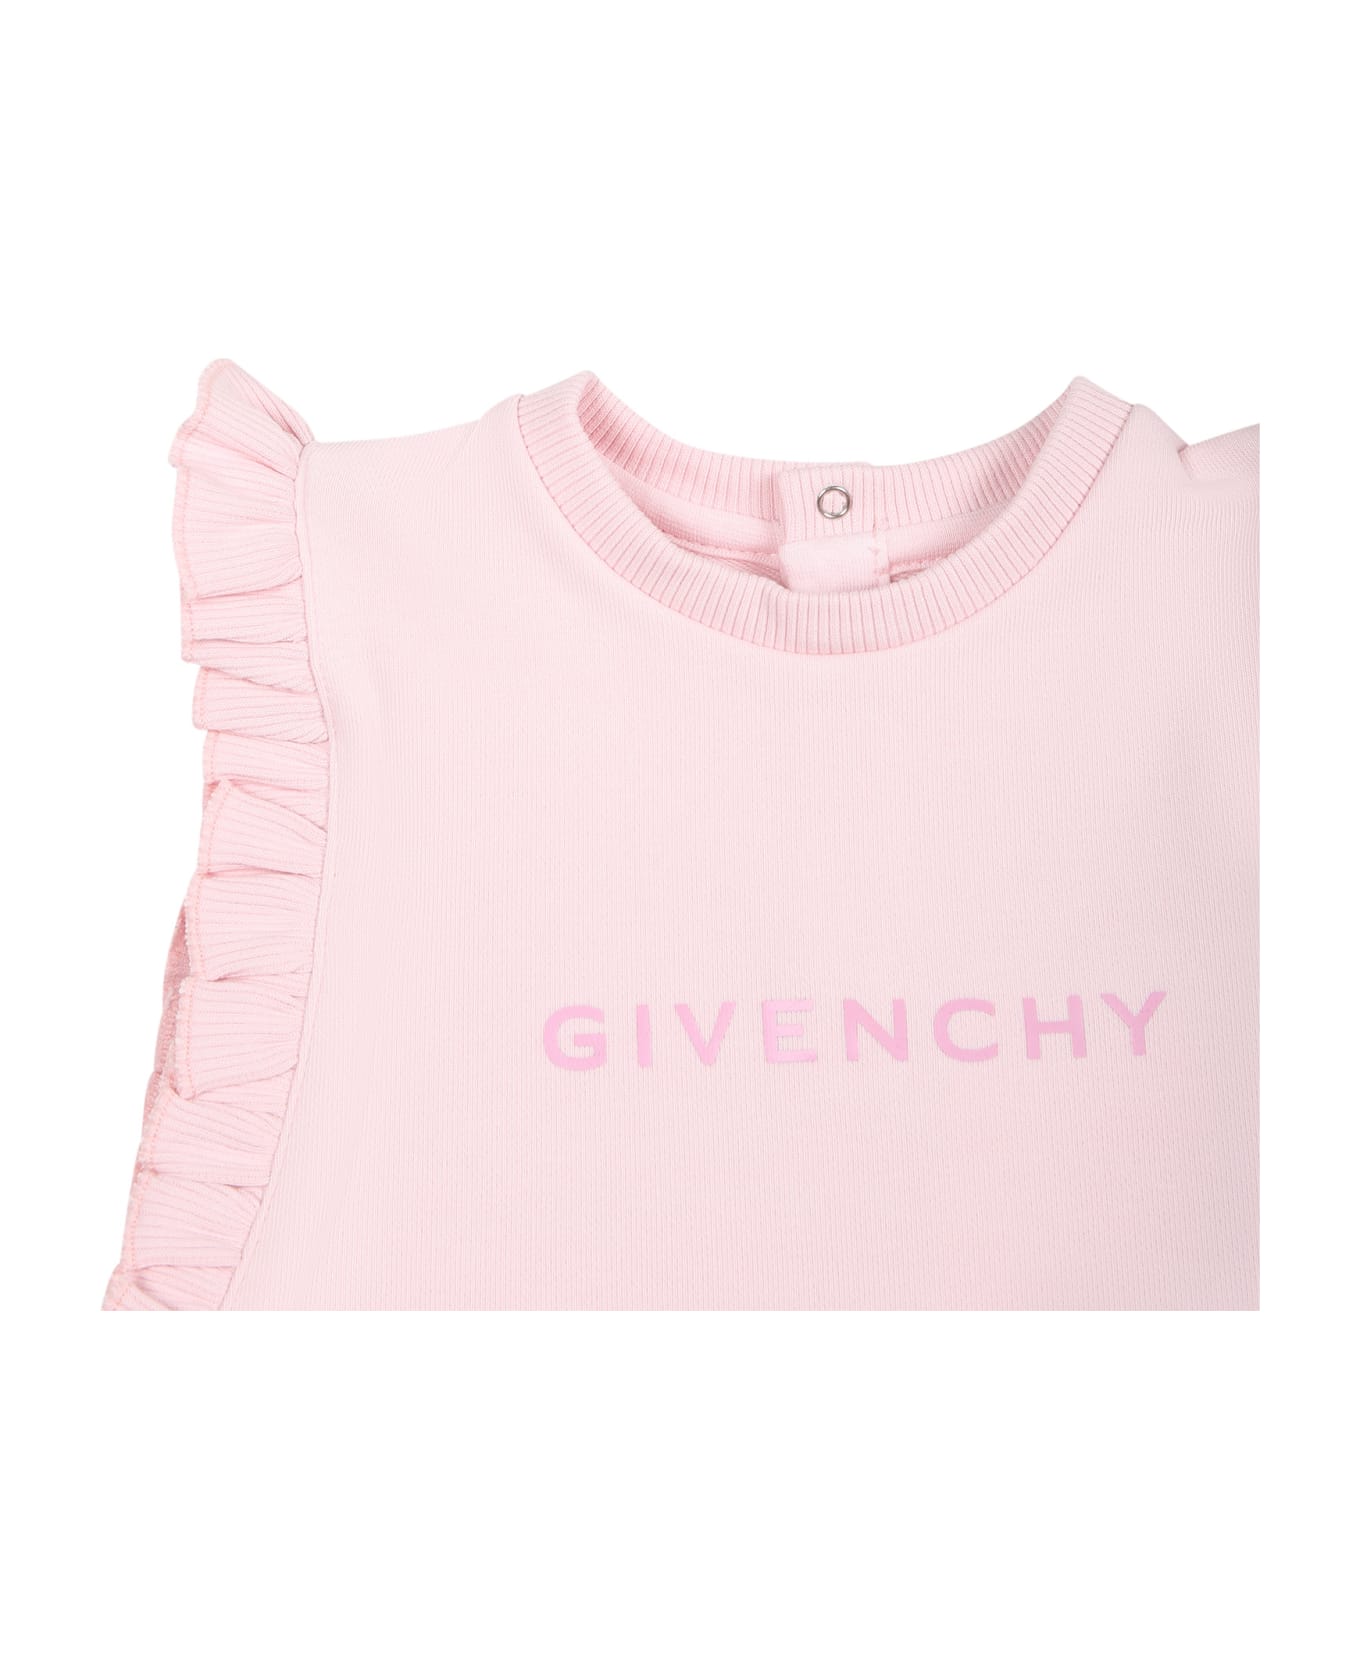 Givenchy Pink Dress For Baby Girl With Logo - Rosa ウェア